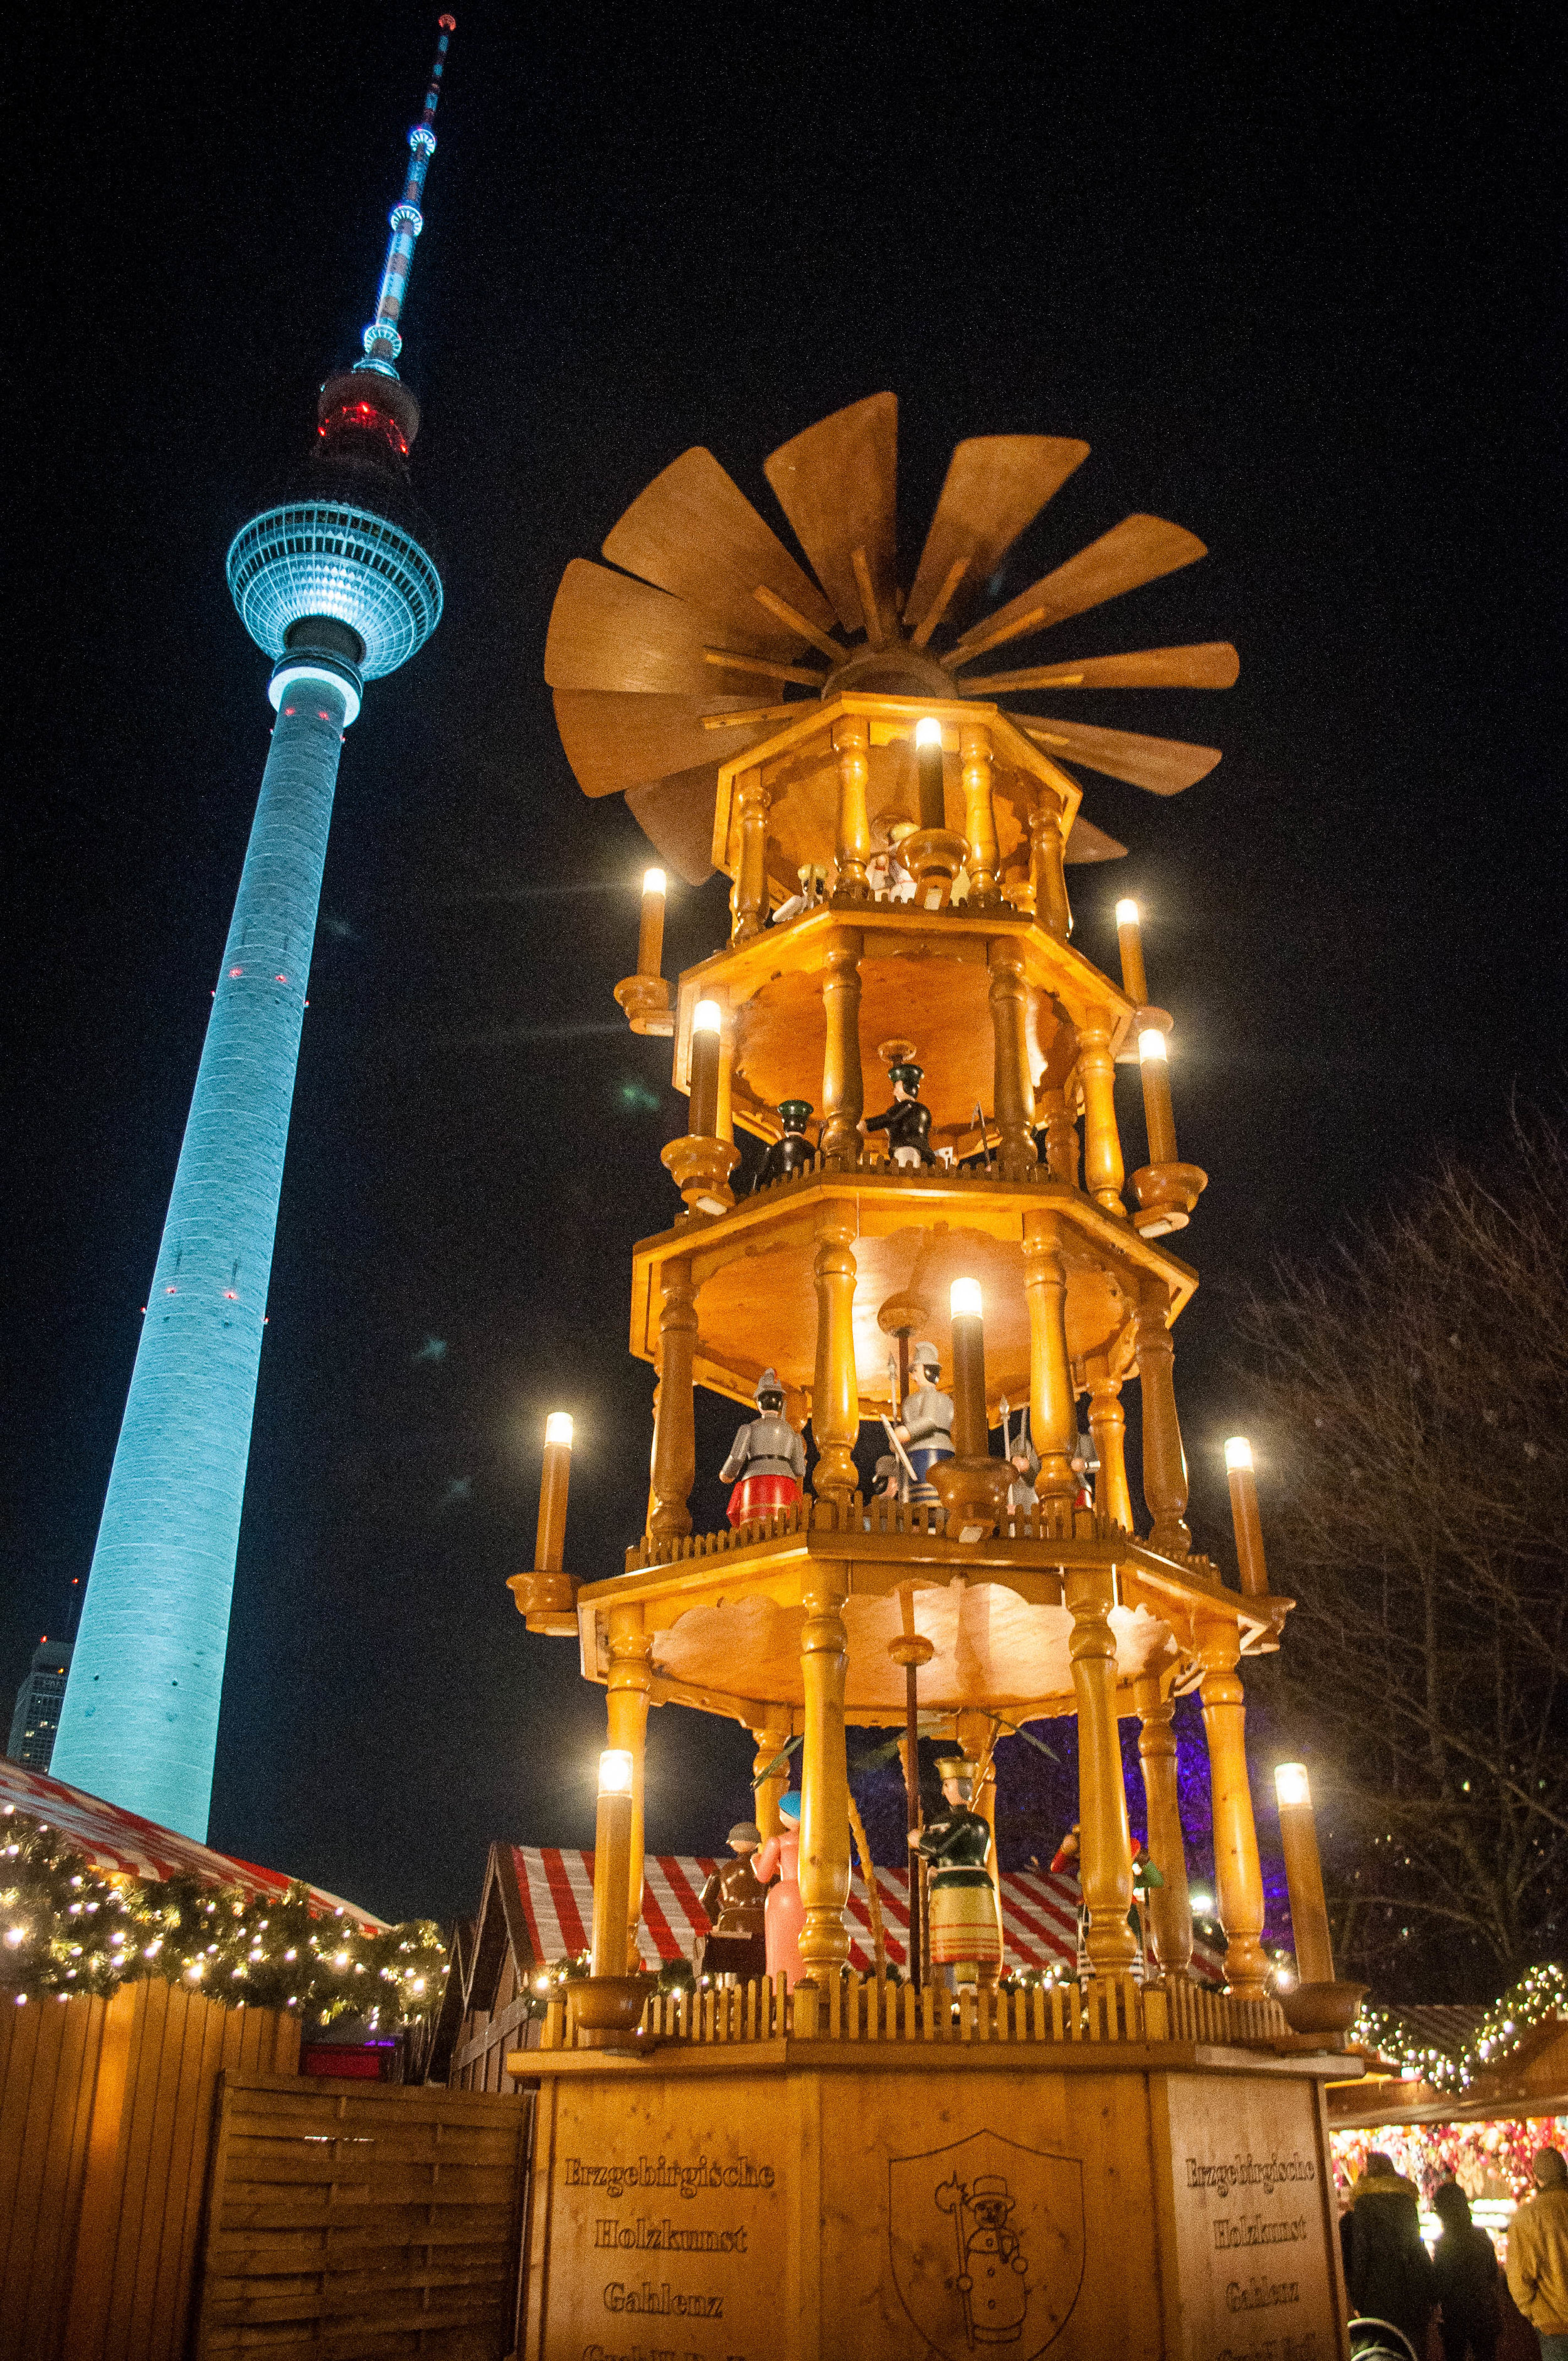 How to plan your trip to the German Christmas Markets